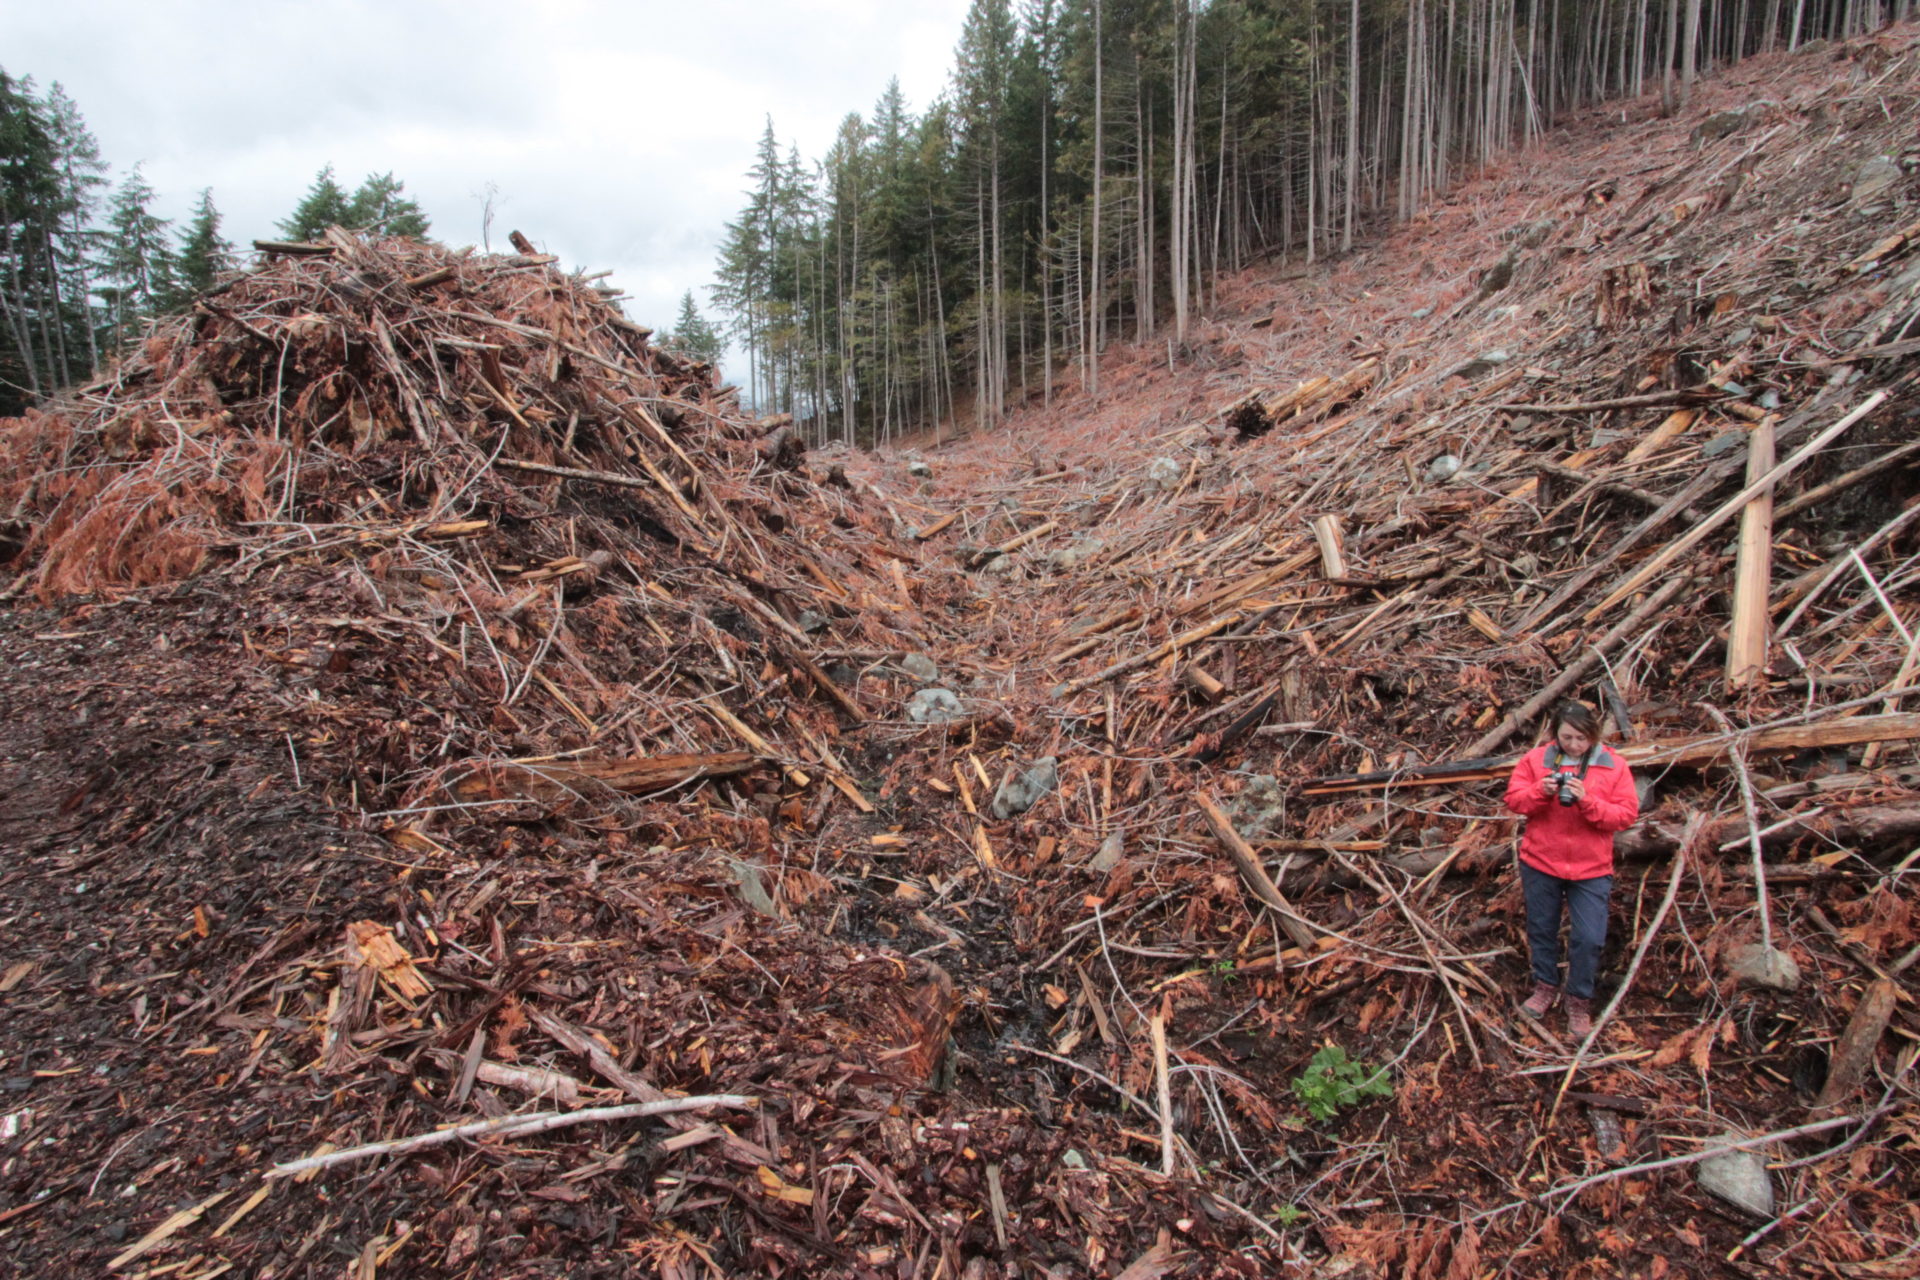 Charlotte Dawe, conservation and policy campaigner with the Wilderness Committee, stands in the Karen Creek clearcut. The Karen Creek watershed is located just east of Hope, B.C., and just off the Coquihalla Highway, within a Wildlife Habitat Area designated by the B.C. government to preserve spotted owl forest habitat. Photo: Wilderness Committee